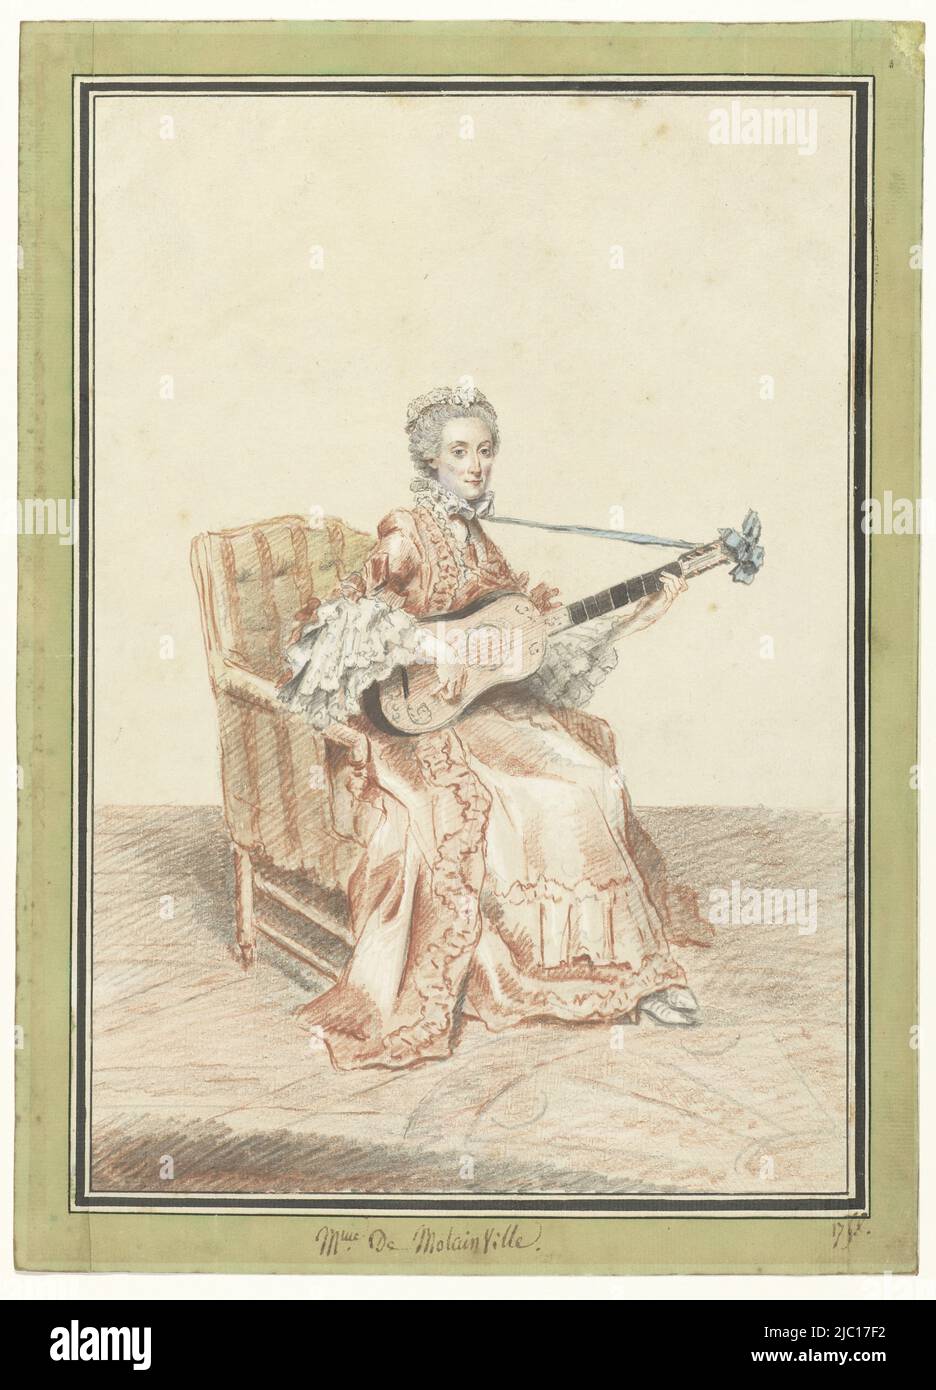 Portrait of Madame de Montainville, sitting on a chair, playing guitar. The portrait is part of a series of 750 portraits of the nobility, magistracy, clergy and scholars and artists from the surroundings of the Duc de Chartres, Portrait of Madame de Montainville, playing the guitar., draughtsman: Louis de Carmontelle, 1758, paper, brush, h 256 mm × w 177 mm Stock Photo